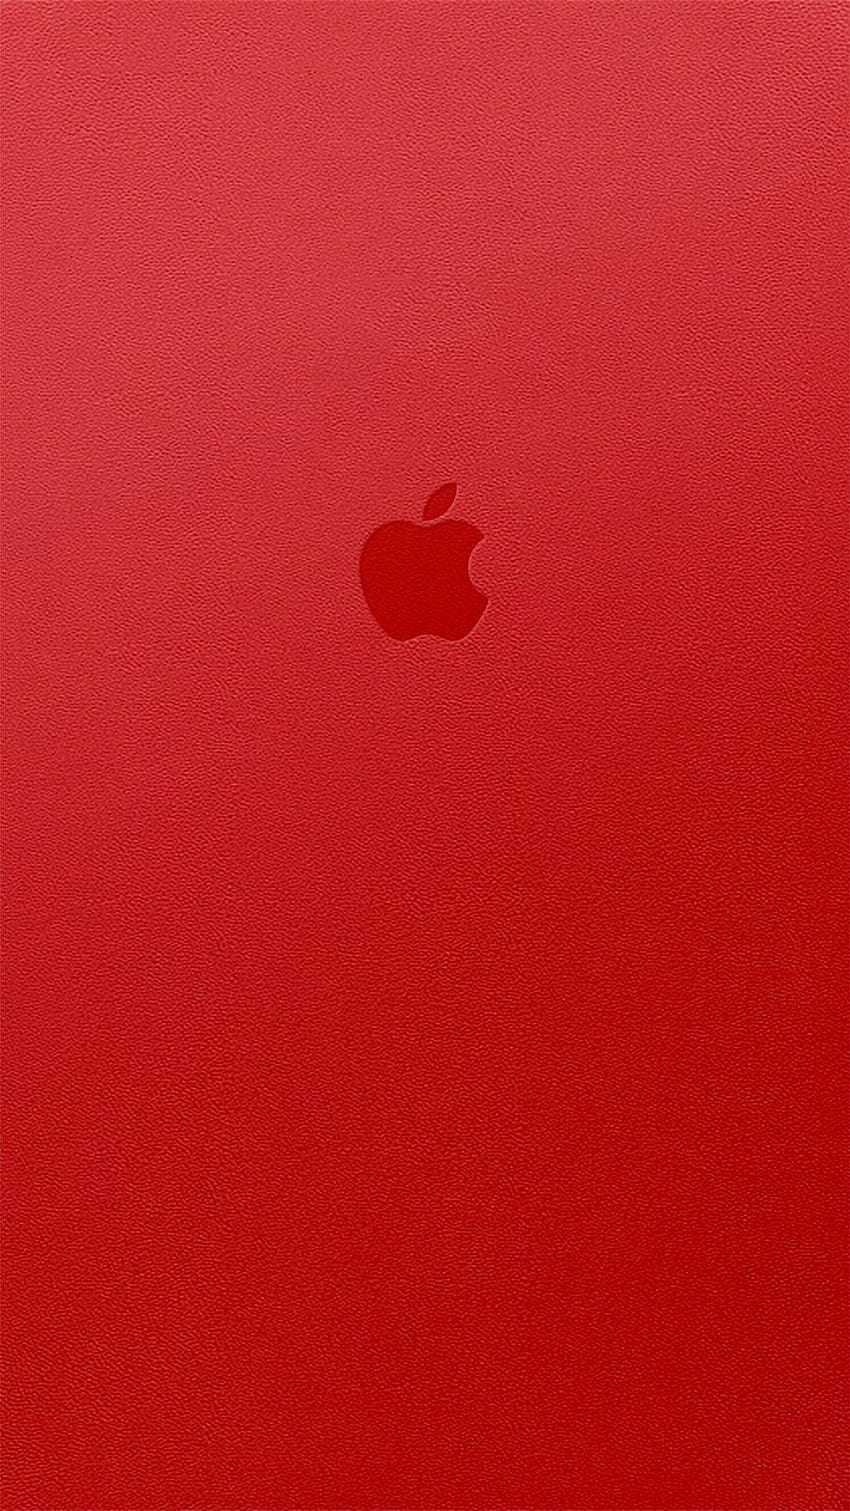 8 Red Iphone, apple iphone 6 HD phone wallpaper